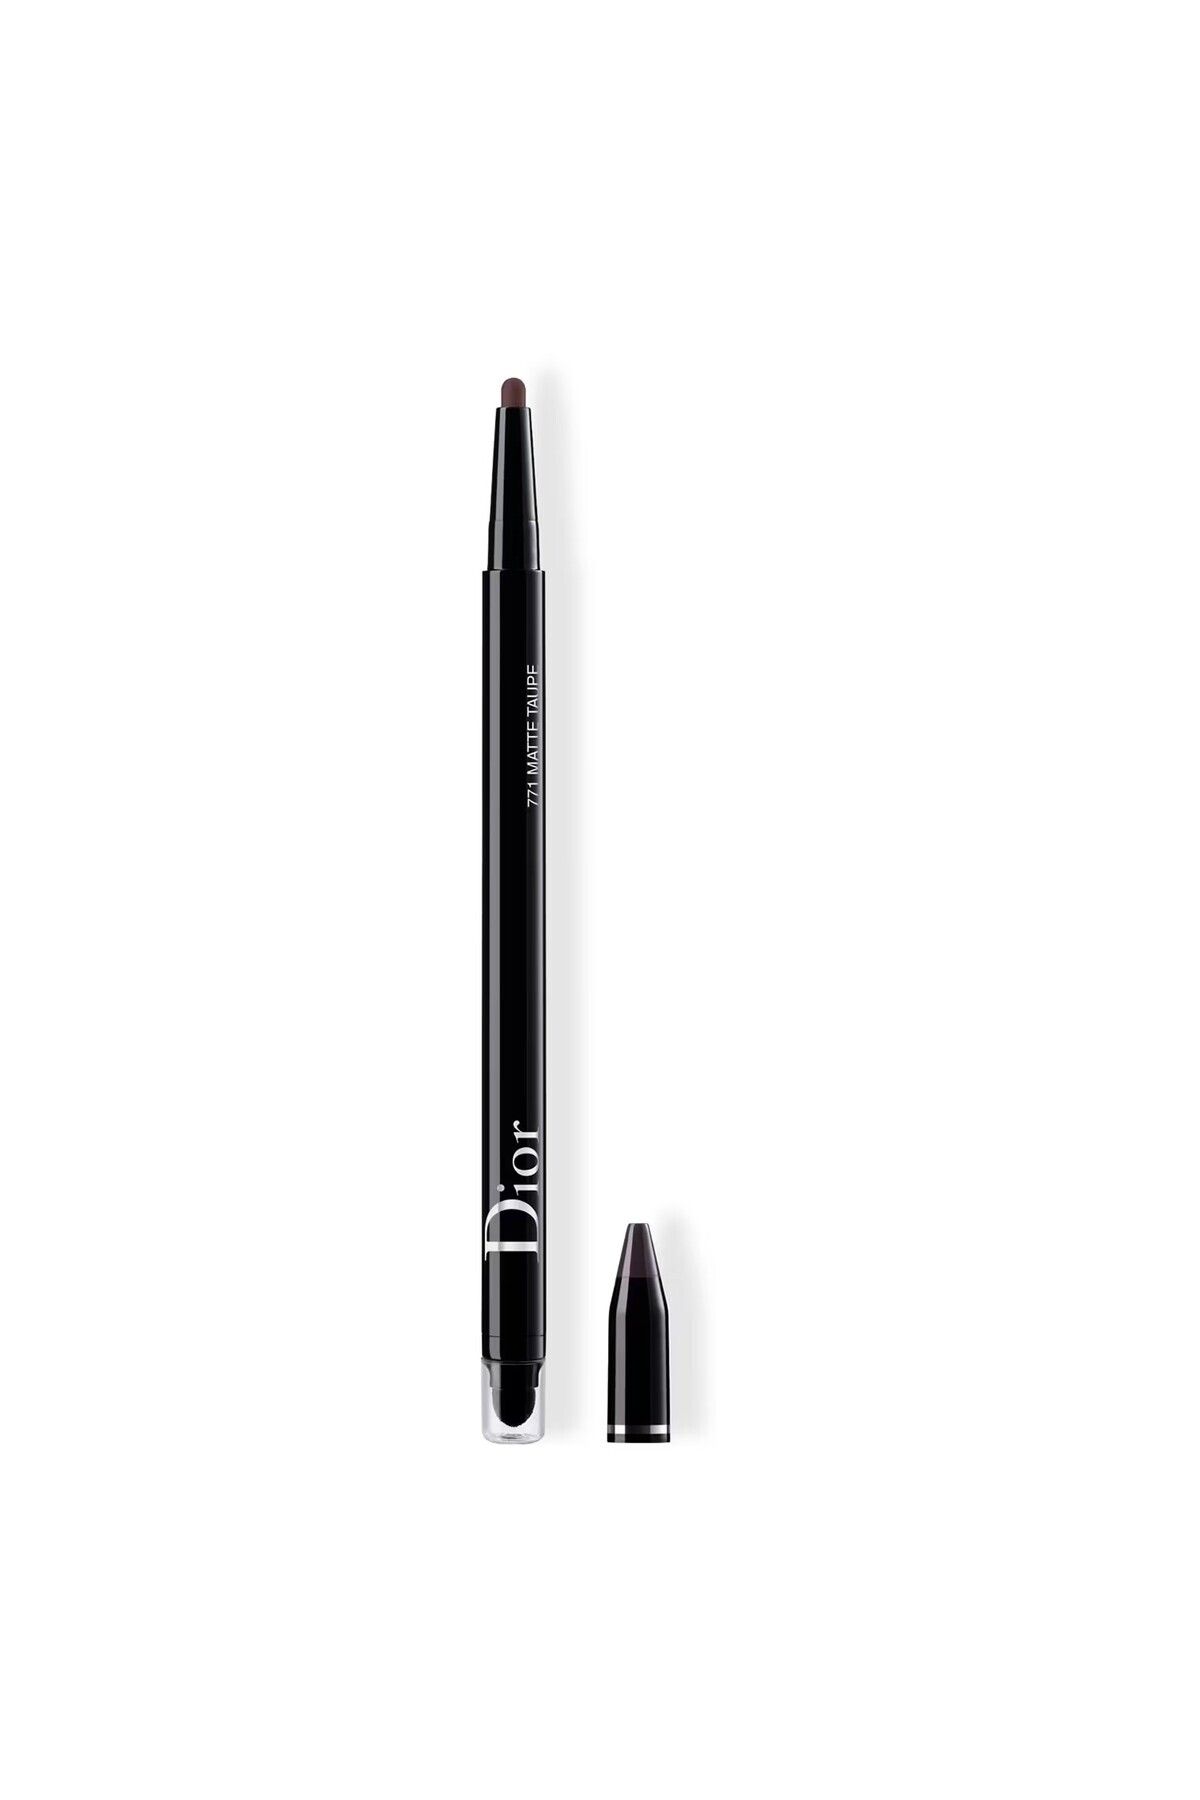 Dior 24H*STYLO WATERPROOF -WEAR-LASTİNG PROTECTİON FOR UP TO 24 HOURS, MATTE EYELİNER PSSN1966